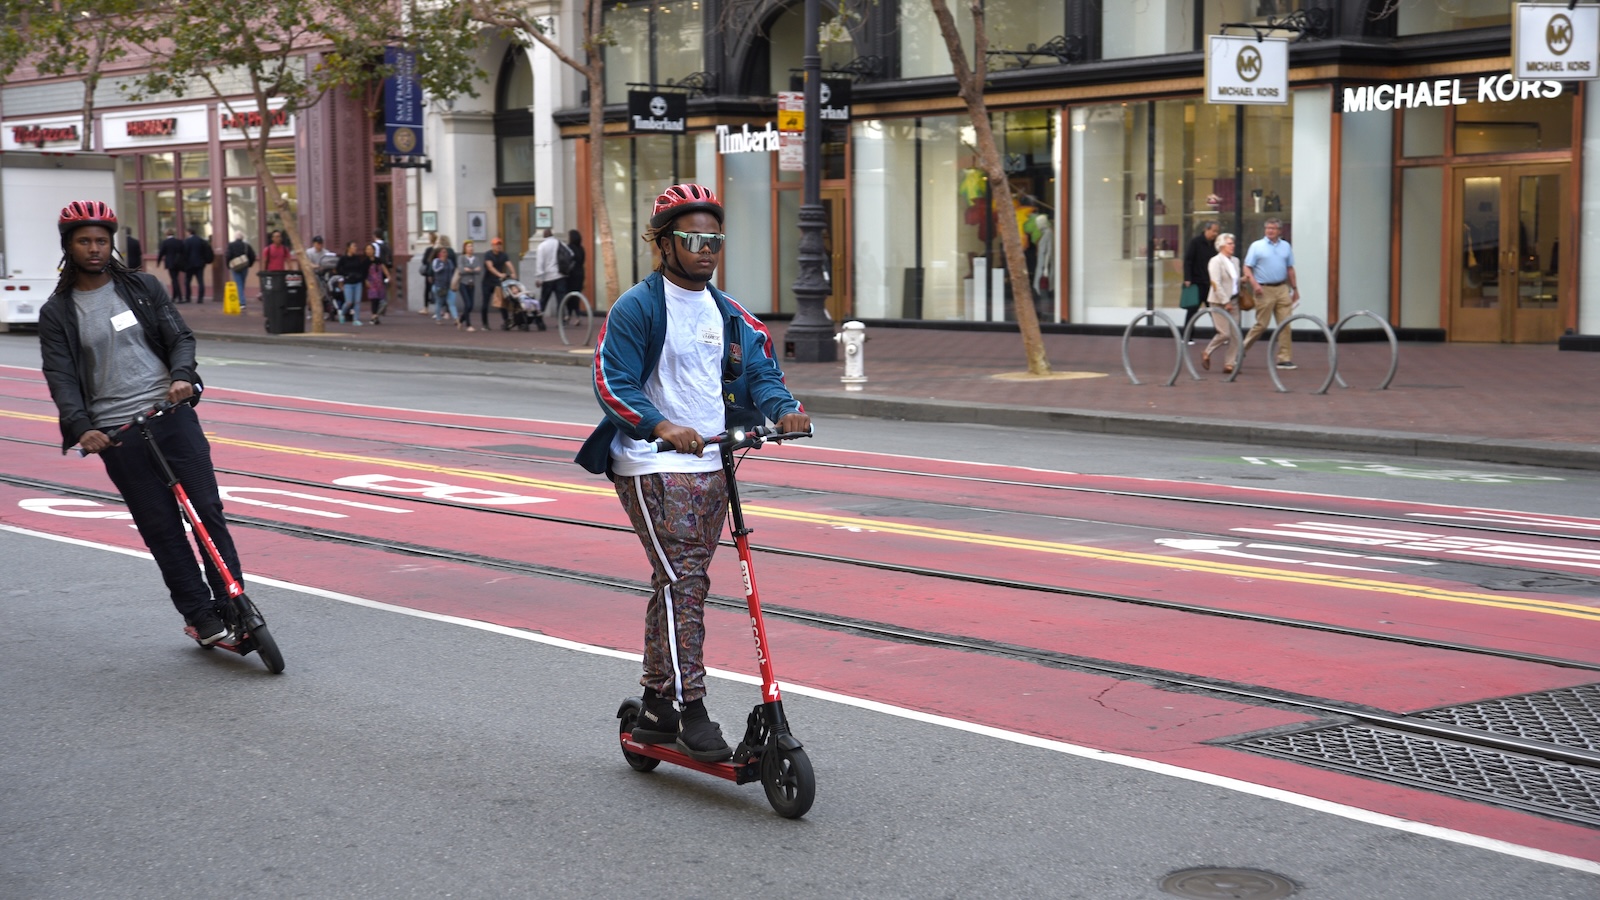 Tourists visiting San Francisco ride their rented Scoot electric scooters down Market Street.